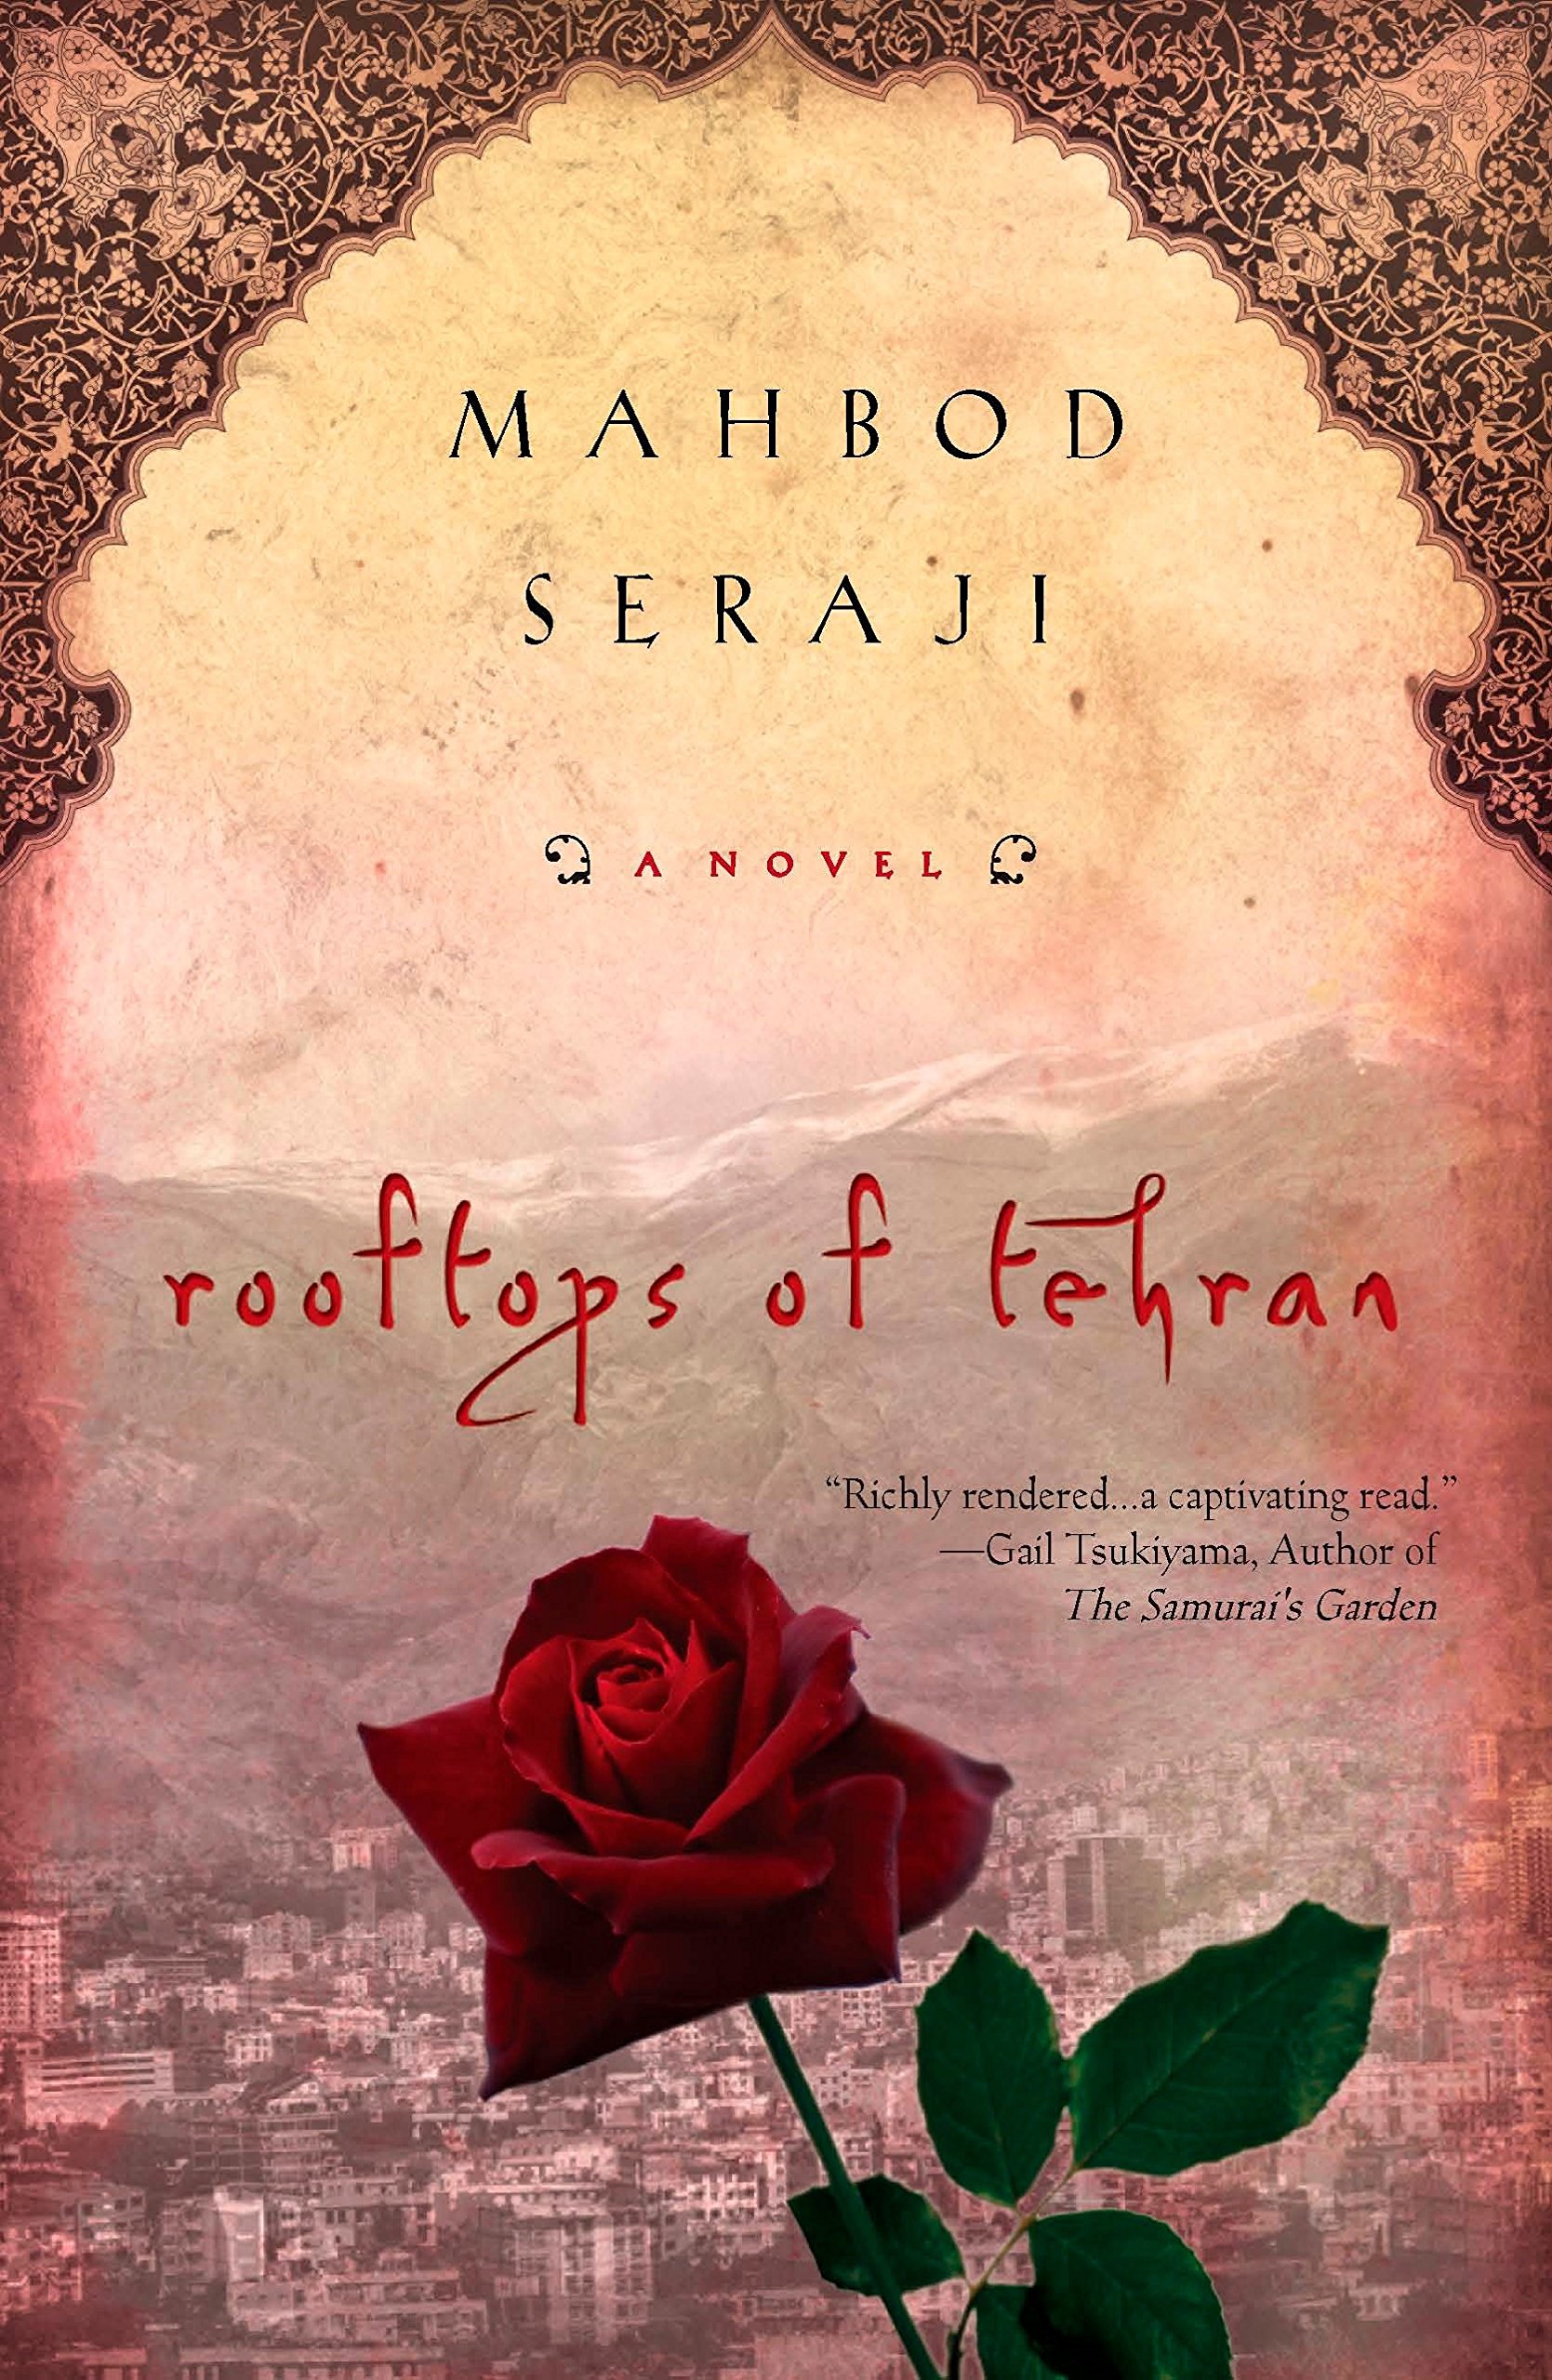 The Rooftops of Tehran by Mahbod Seraji